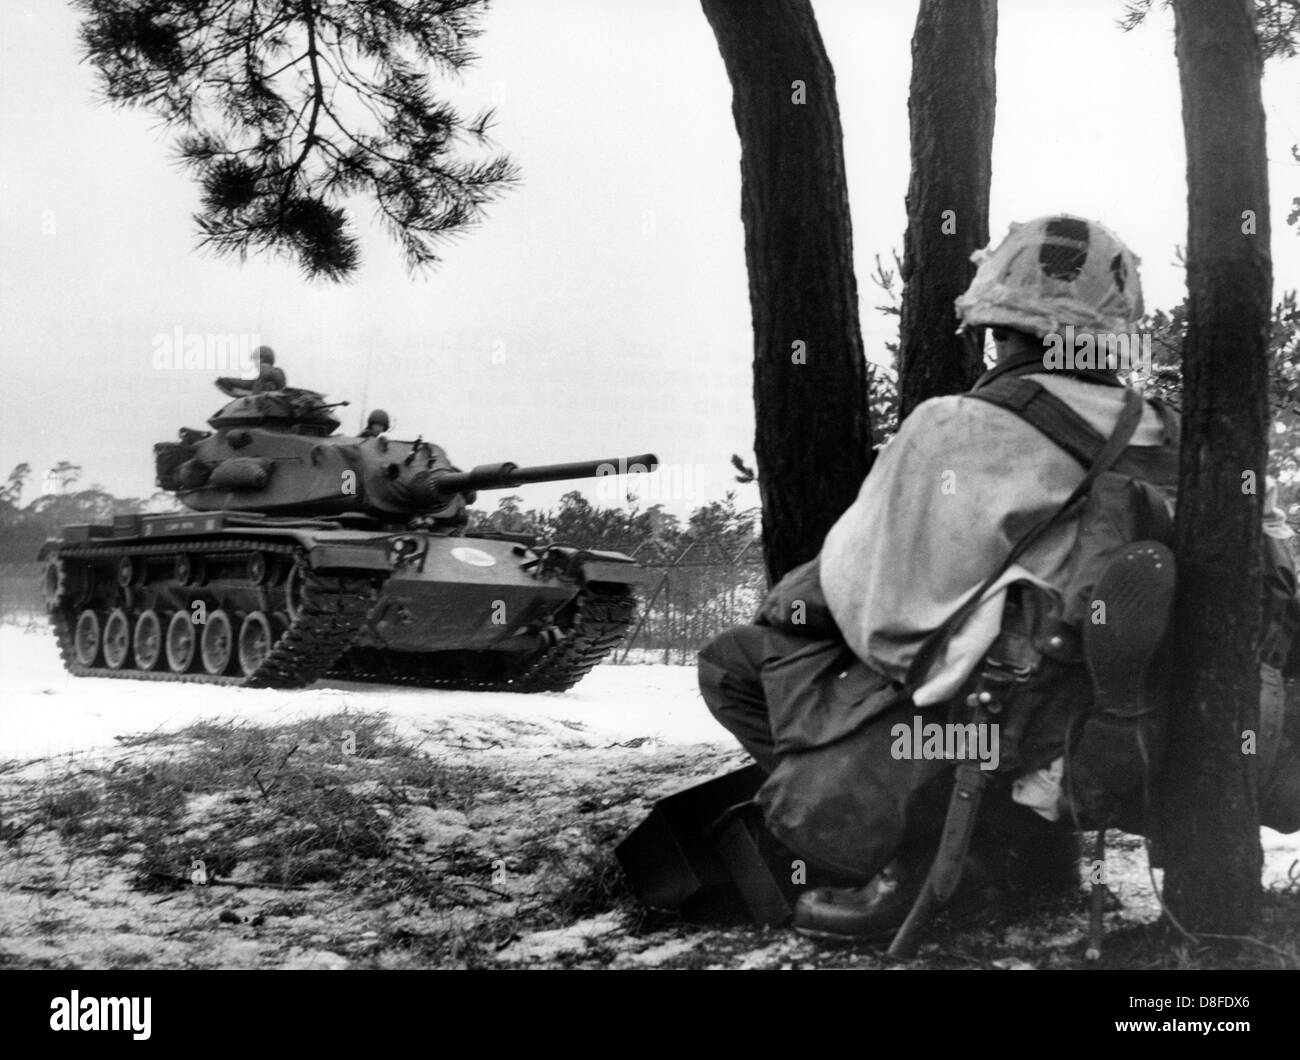 Infantry units and tanks of the US army participate in a manoeuvre in Grunewald in Berlin on the 23rd of January in 1964. Stock Photo